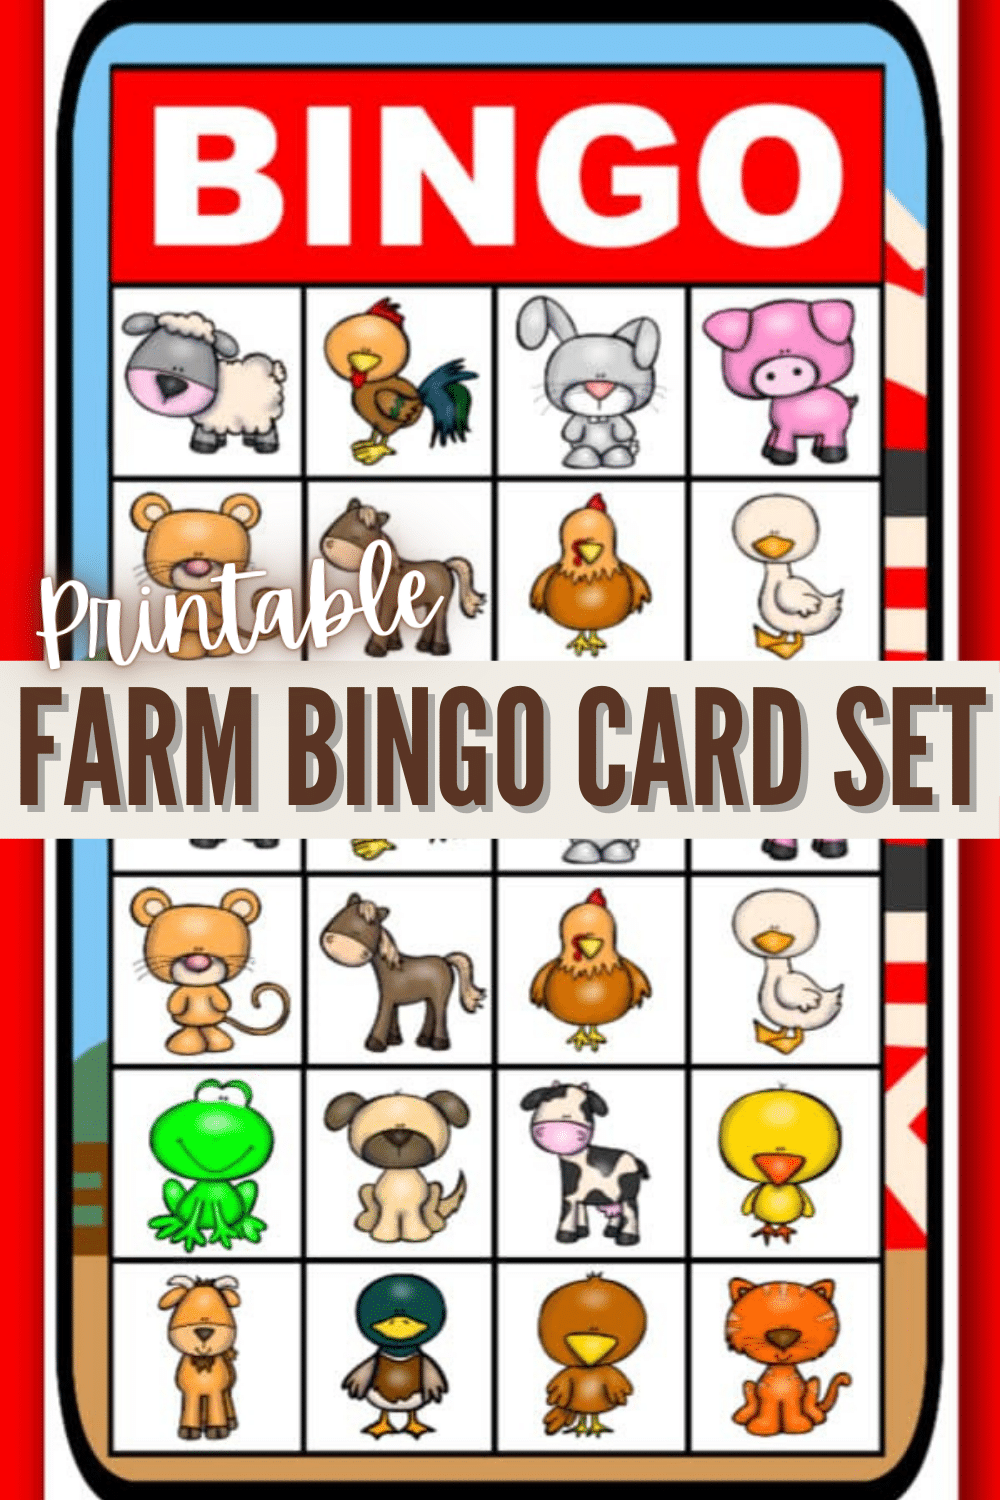 Printable farm bingo is the perfect game to play at any farm themed party or just for fun. A colorful and easy farm game that kids will love. #farm #bingo #printables via @wondermomwannab